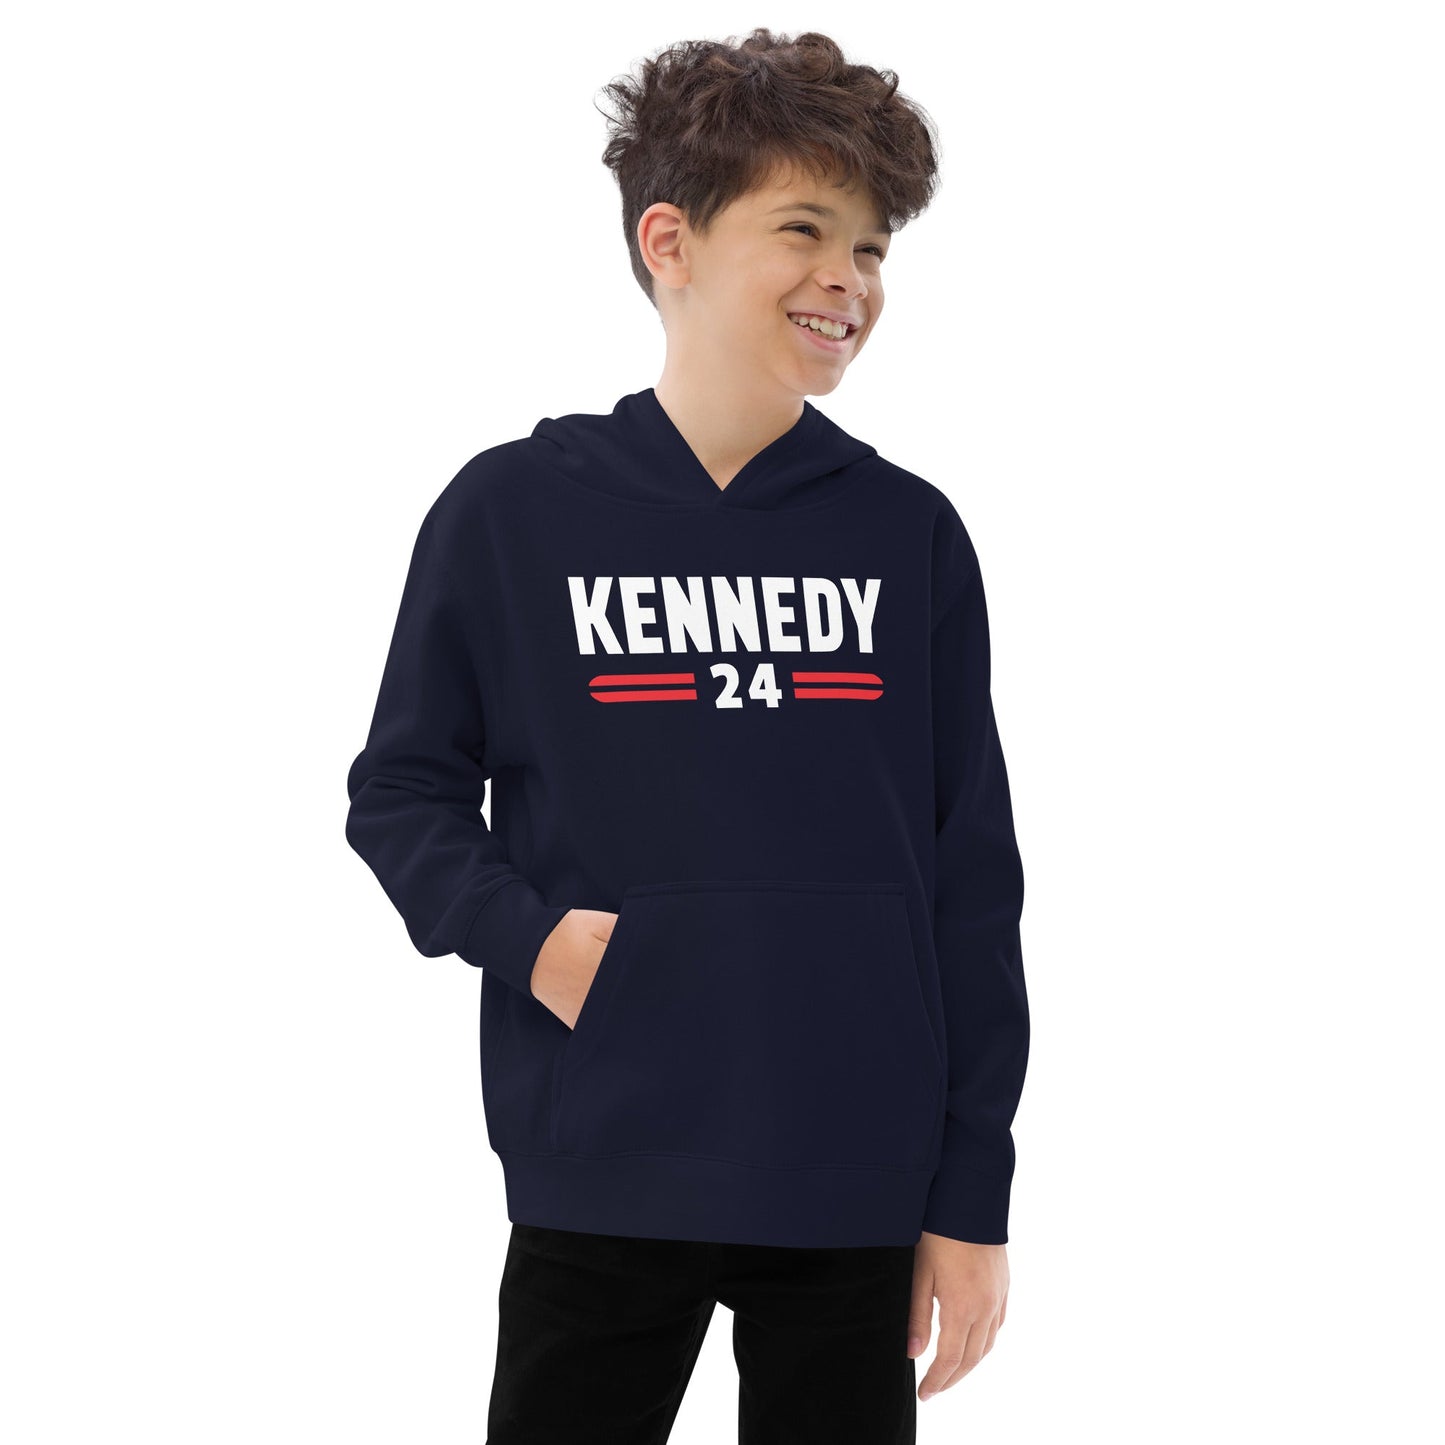 Kennedy Classic Youth Hoodie - TEAM KENNEDY. All rights reserved